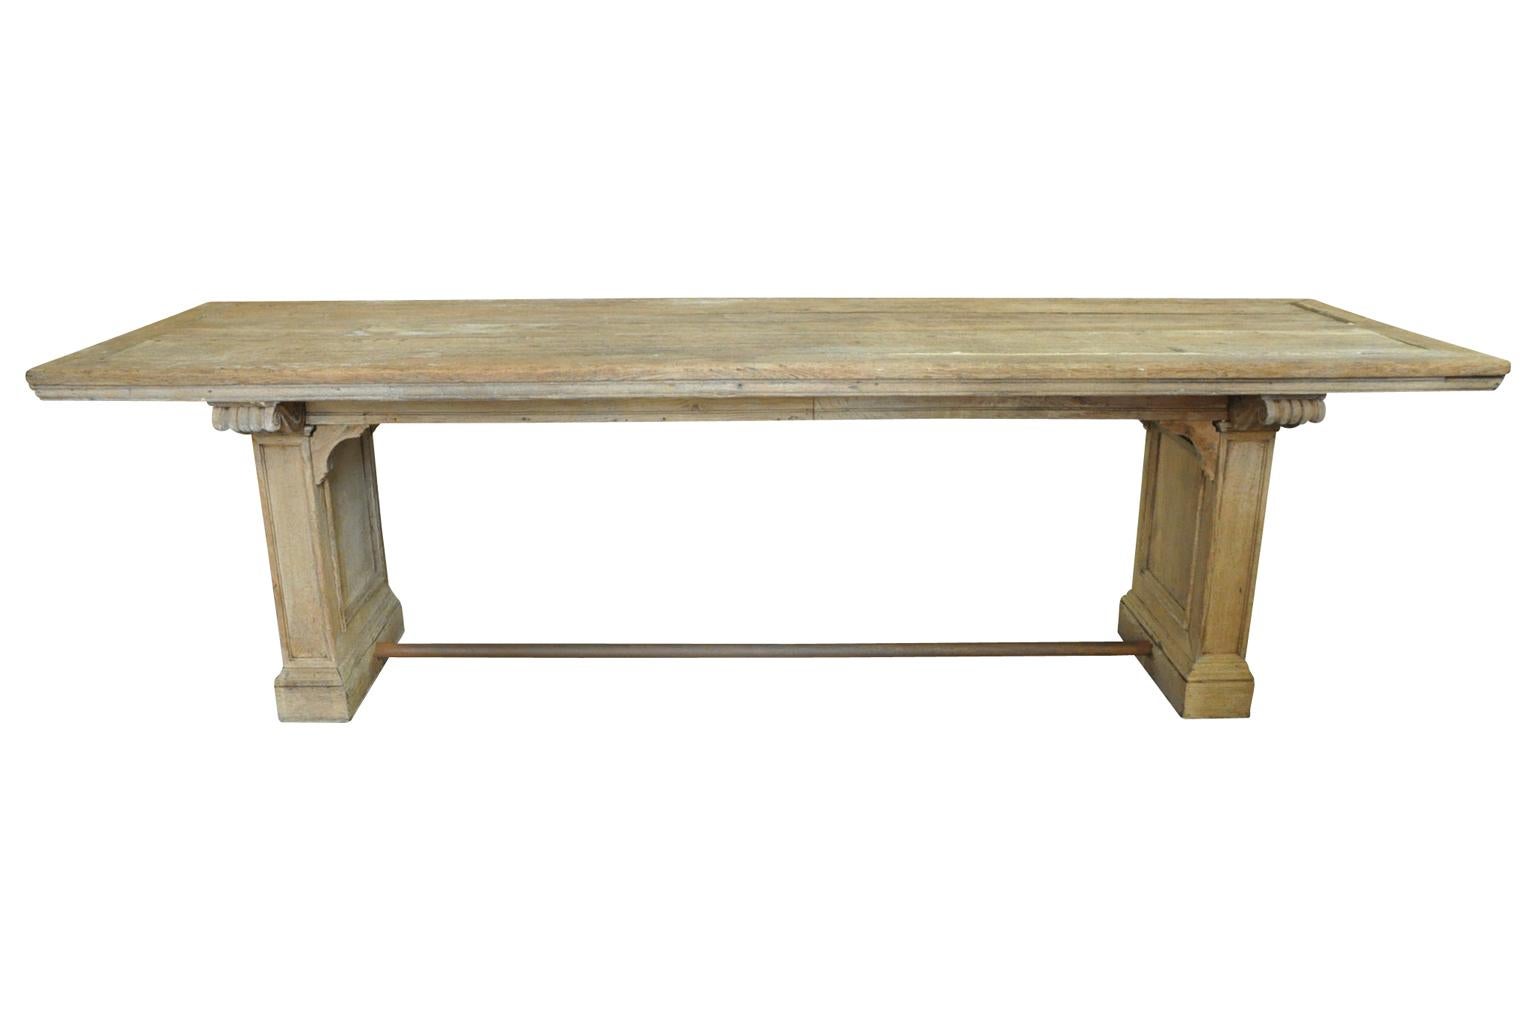 A very lovely 19th century library table - Trestle table from the Provence region of France. Wonderfully constructed from washed oak - very sound. Very handsome scrolling corbels to support the top and wonderful molded paneled legs.